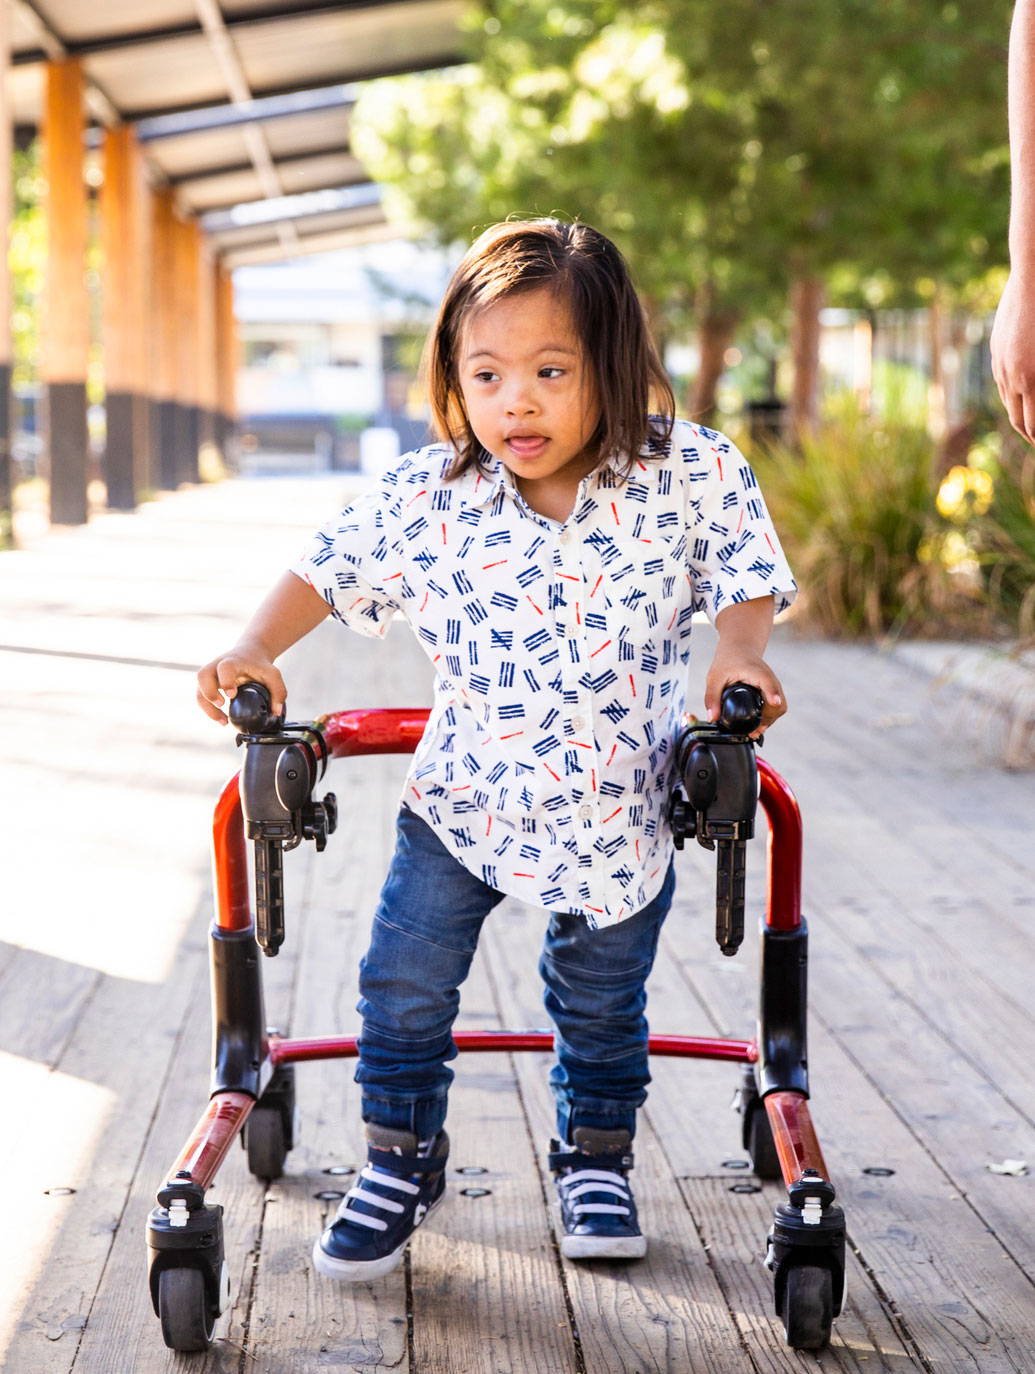 Early Orthotic Intervention in Pediatric Patients, Part 2: Down Syndrome, other neurological conditions, and toe walking